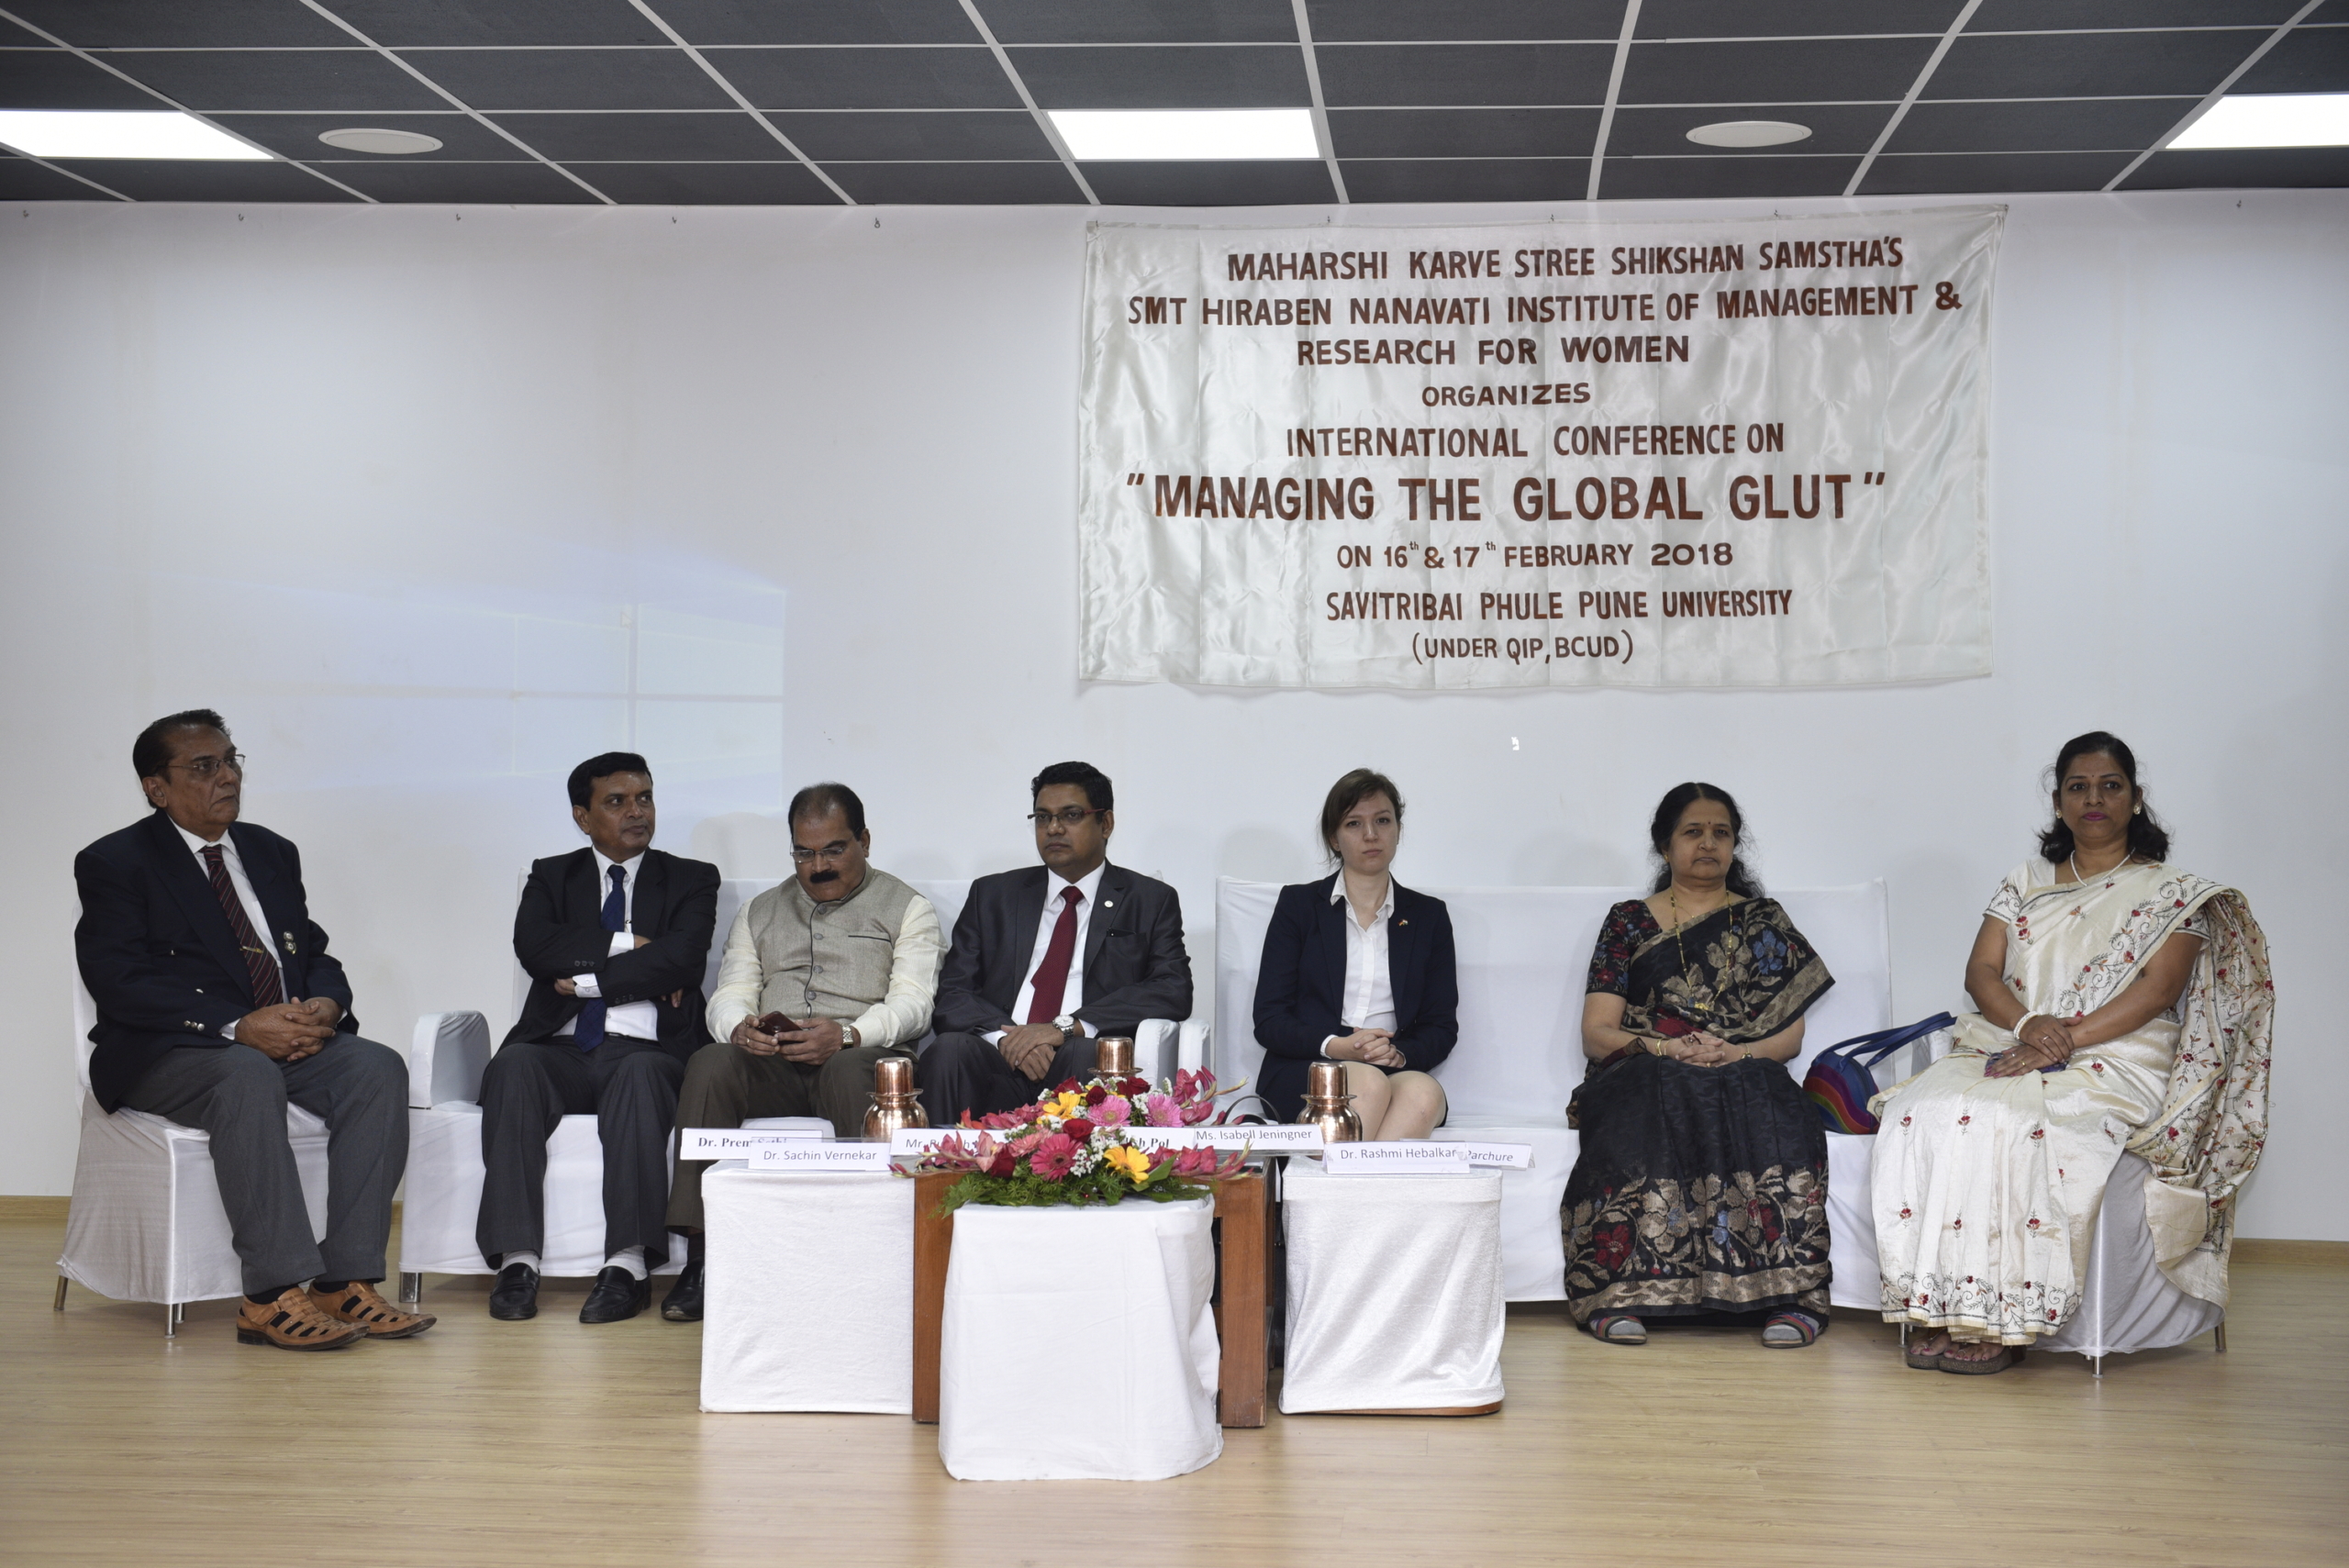 Dignitaries at International Conference 2018 on Managing the Global Glut